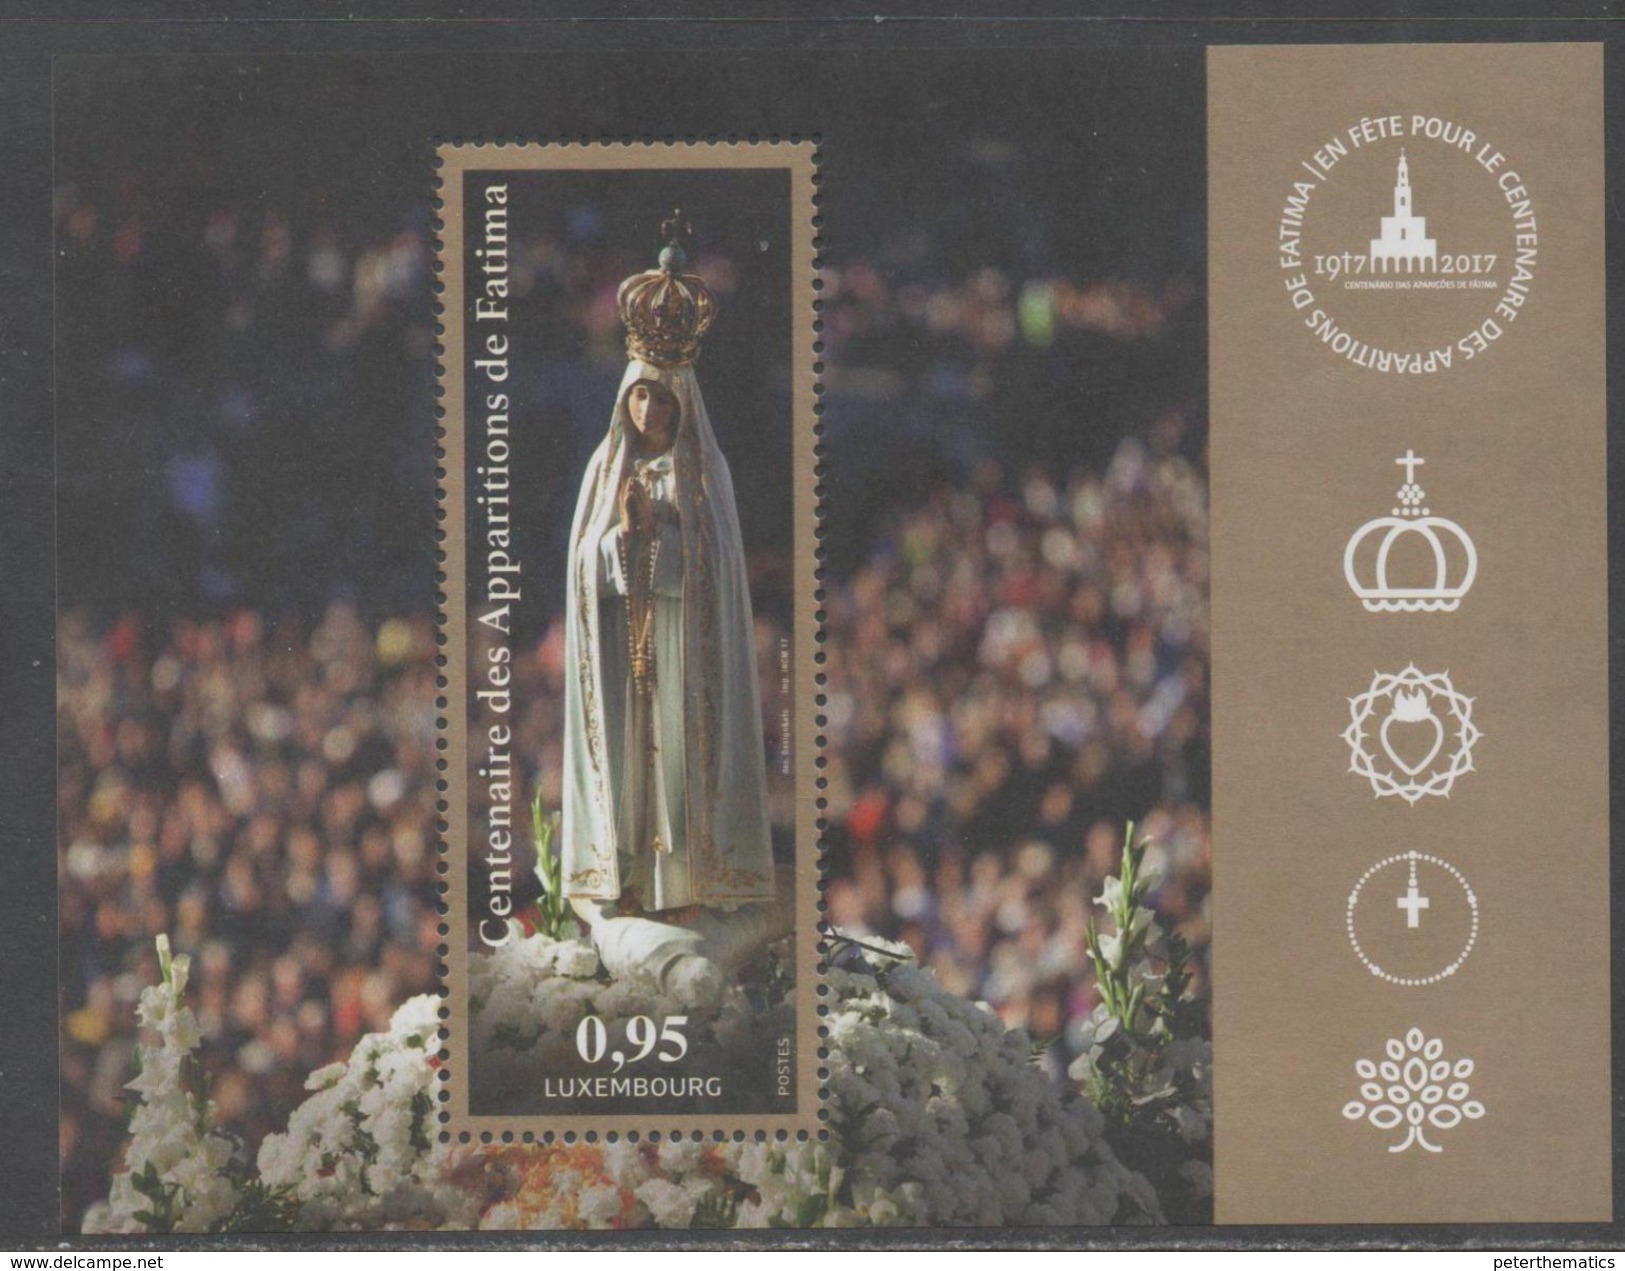 LUXEMBOURG , 2017, MNH, JOINT ISSUE WITH SLOVAKIA, POLAND, RELIGION, CHRISTIANITY, LADY FATIMA, S/SHEET - Joint Issues